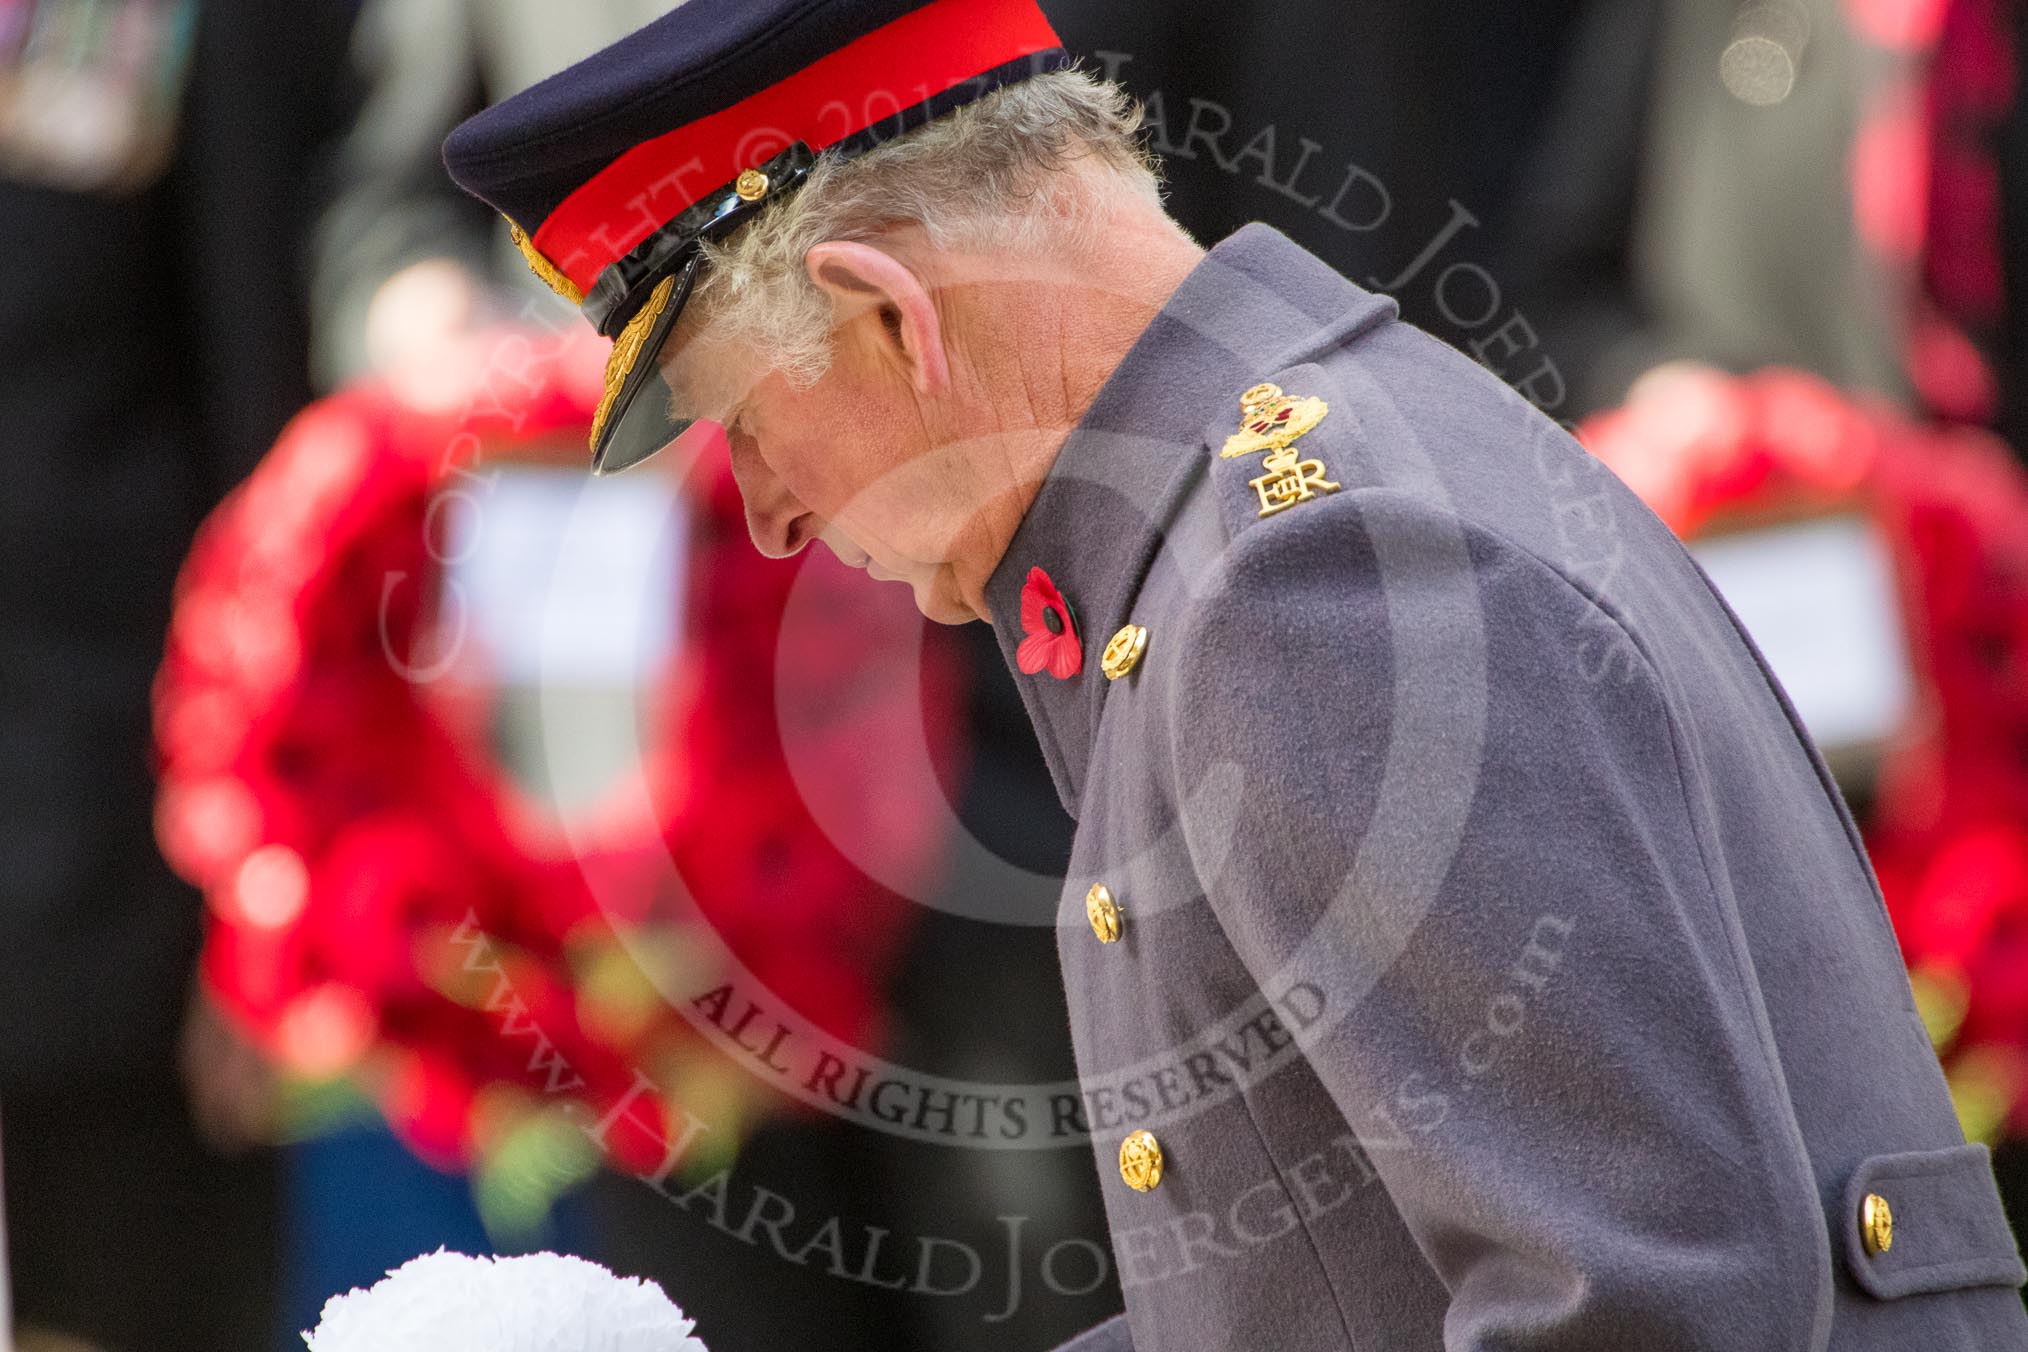 After having laid a wreath on behalf of HM The Queen, HRH The Prince of Wales (Prince Charles) is laying his own wreath during the Remembrance Sunday Cenotaph Ceremony 2018 at Horse Guards Parade, Westminster, London, 11 November 2018, 11:05.